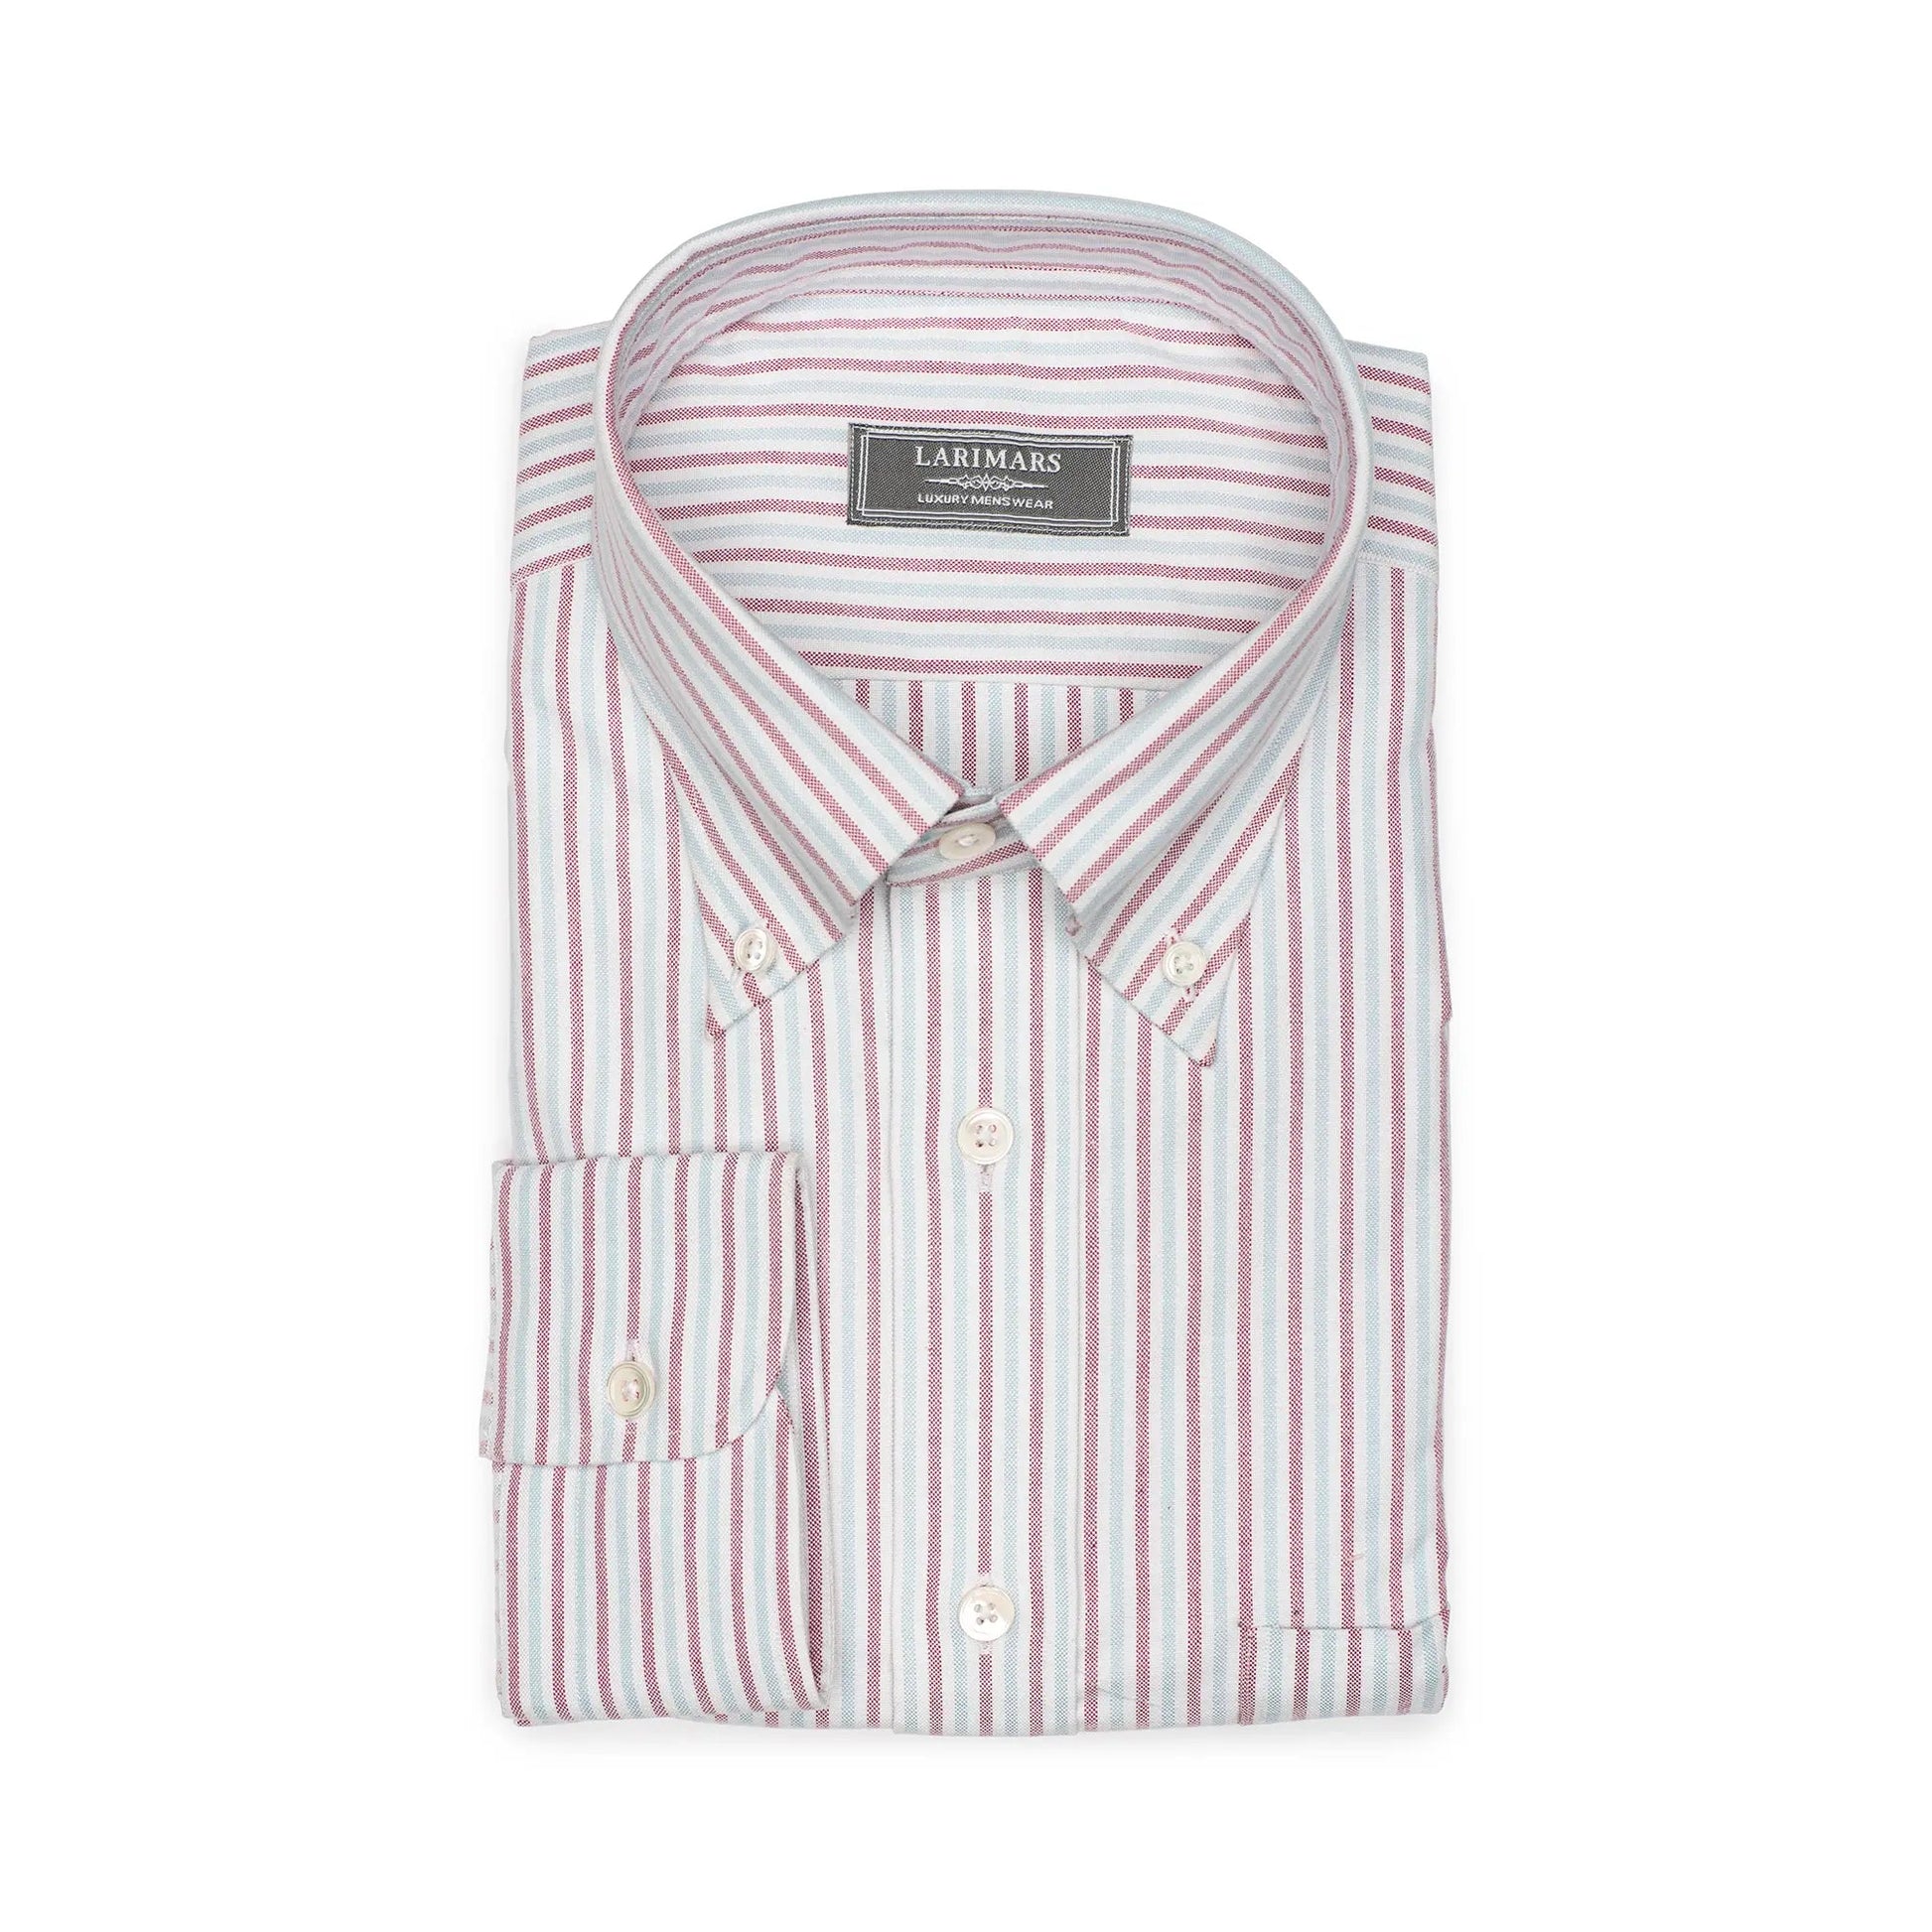 Red Multi Stripe Oxford - Larimars Clothing Men's Formal and casual wear shirts